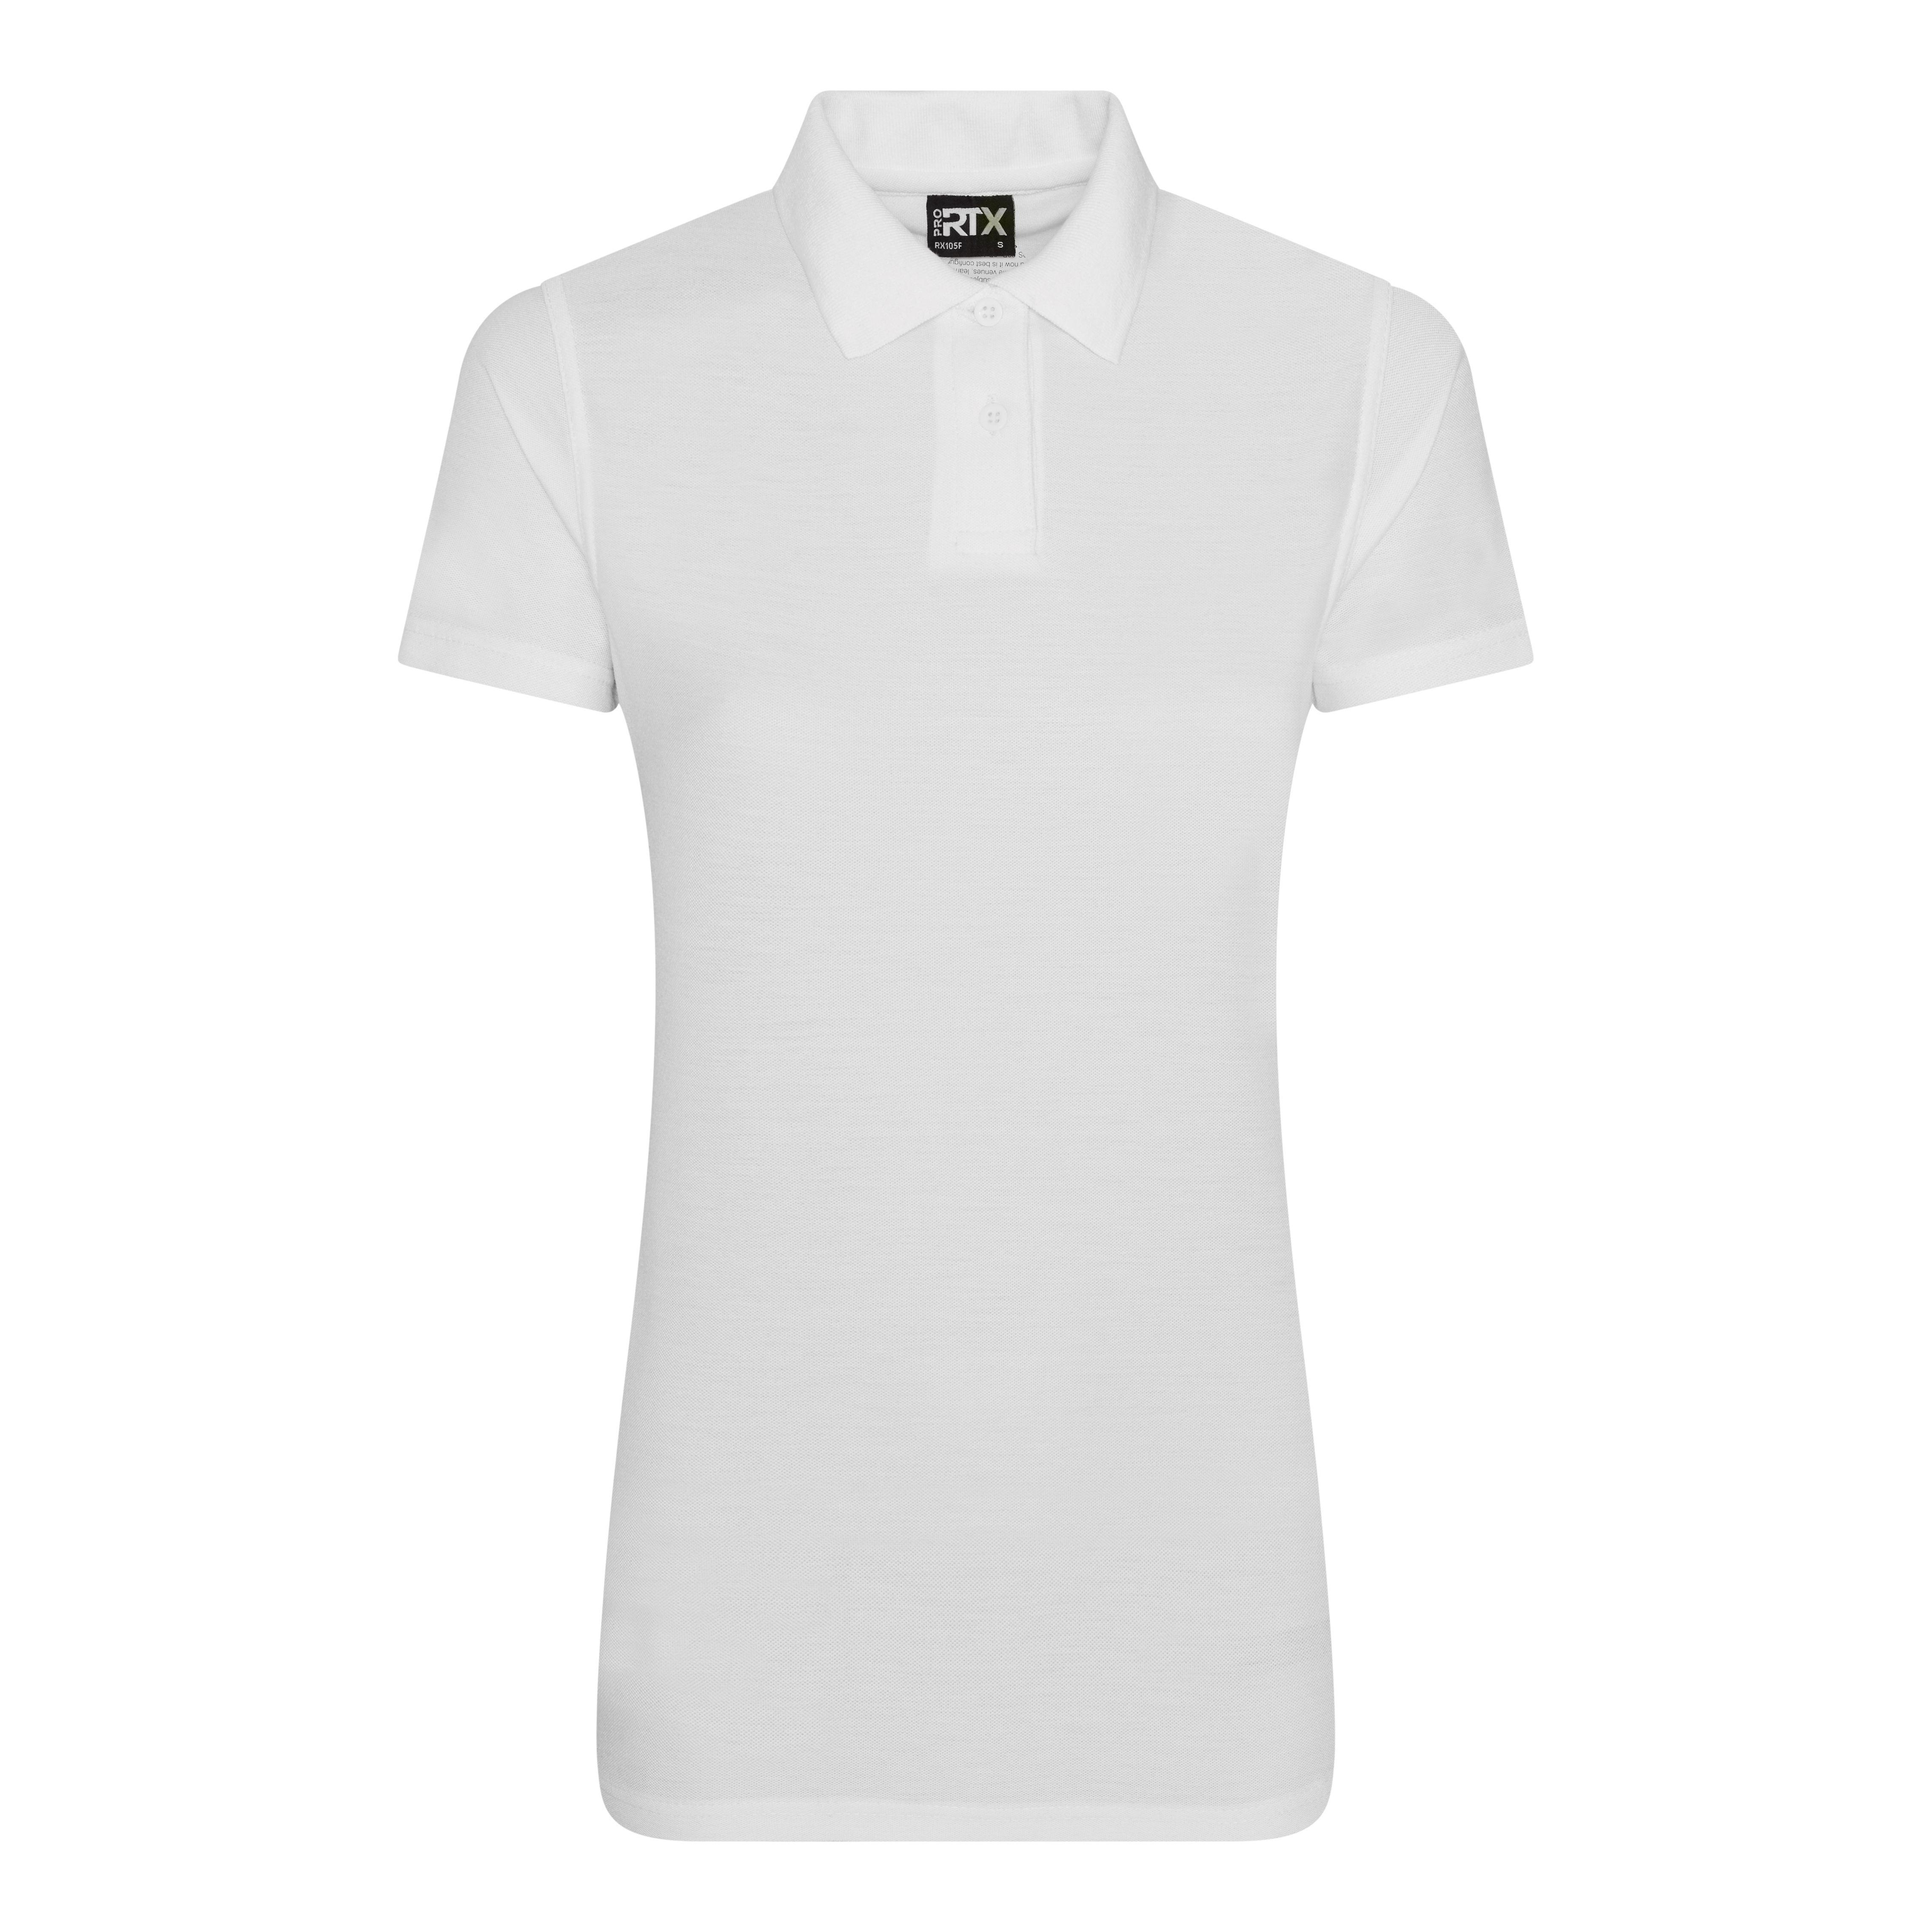 ax-httpswebsystems.s3.amazonaws.comtmp_for_downloadpro-rtx-womens-pro-polyester-white.jpg